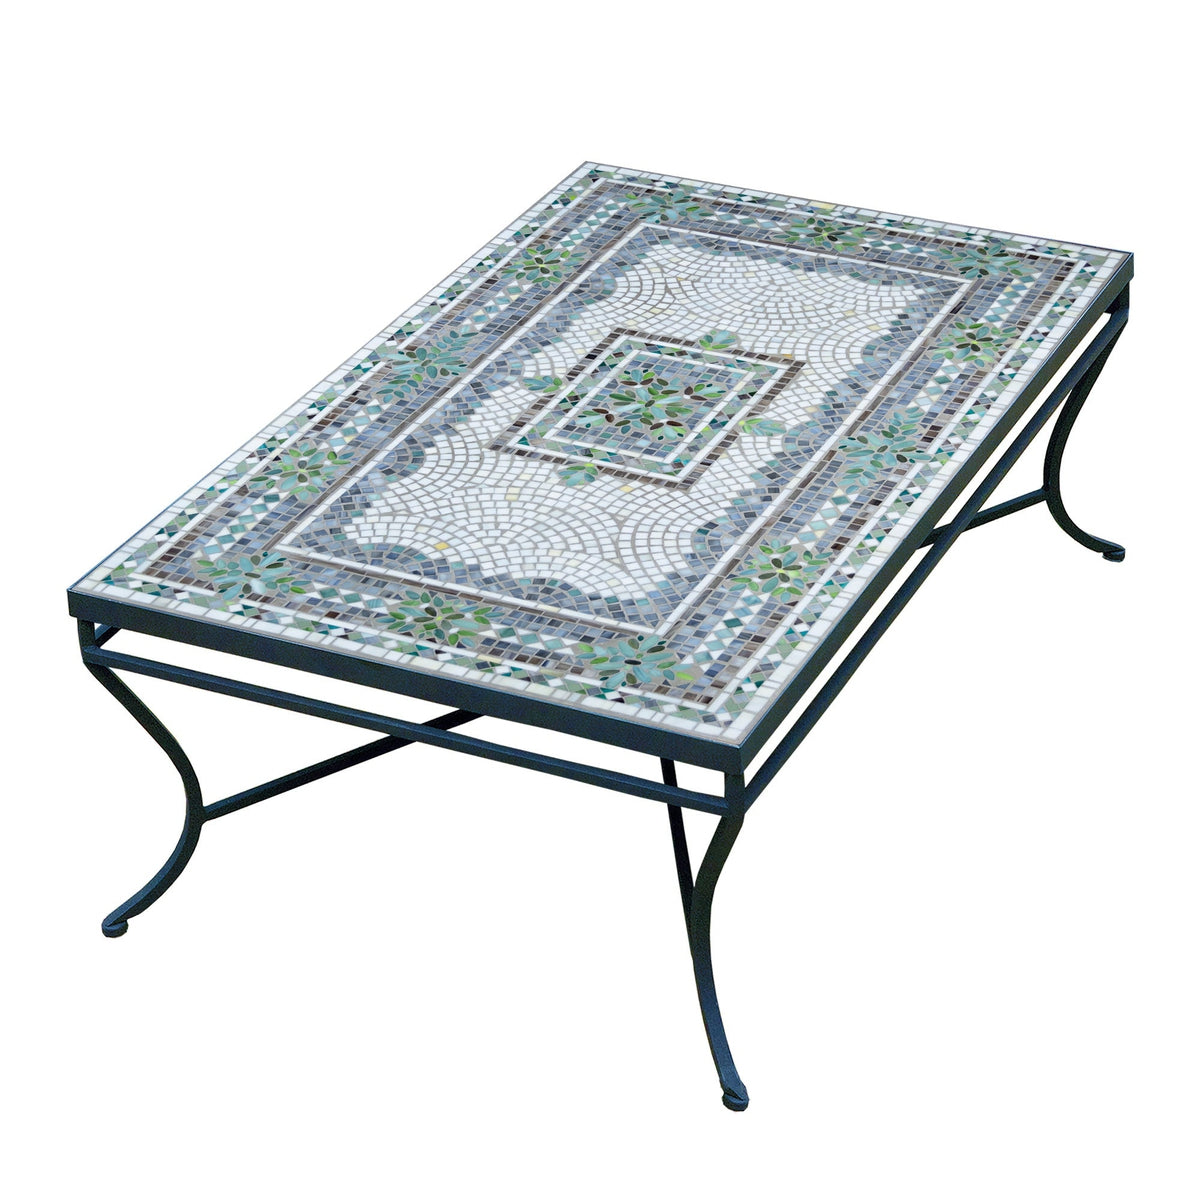 Miraval Mosaic Coffee Table - Rect